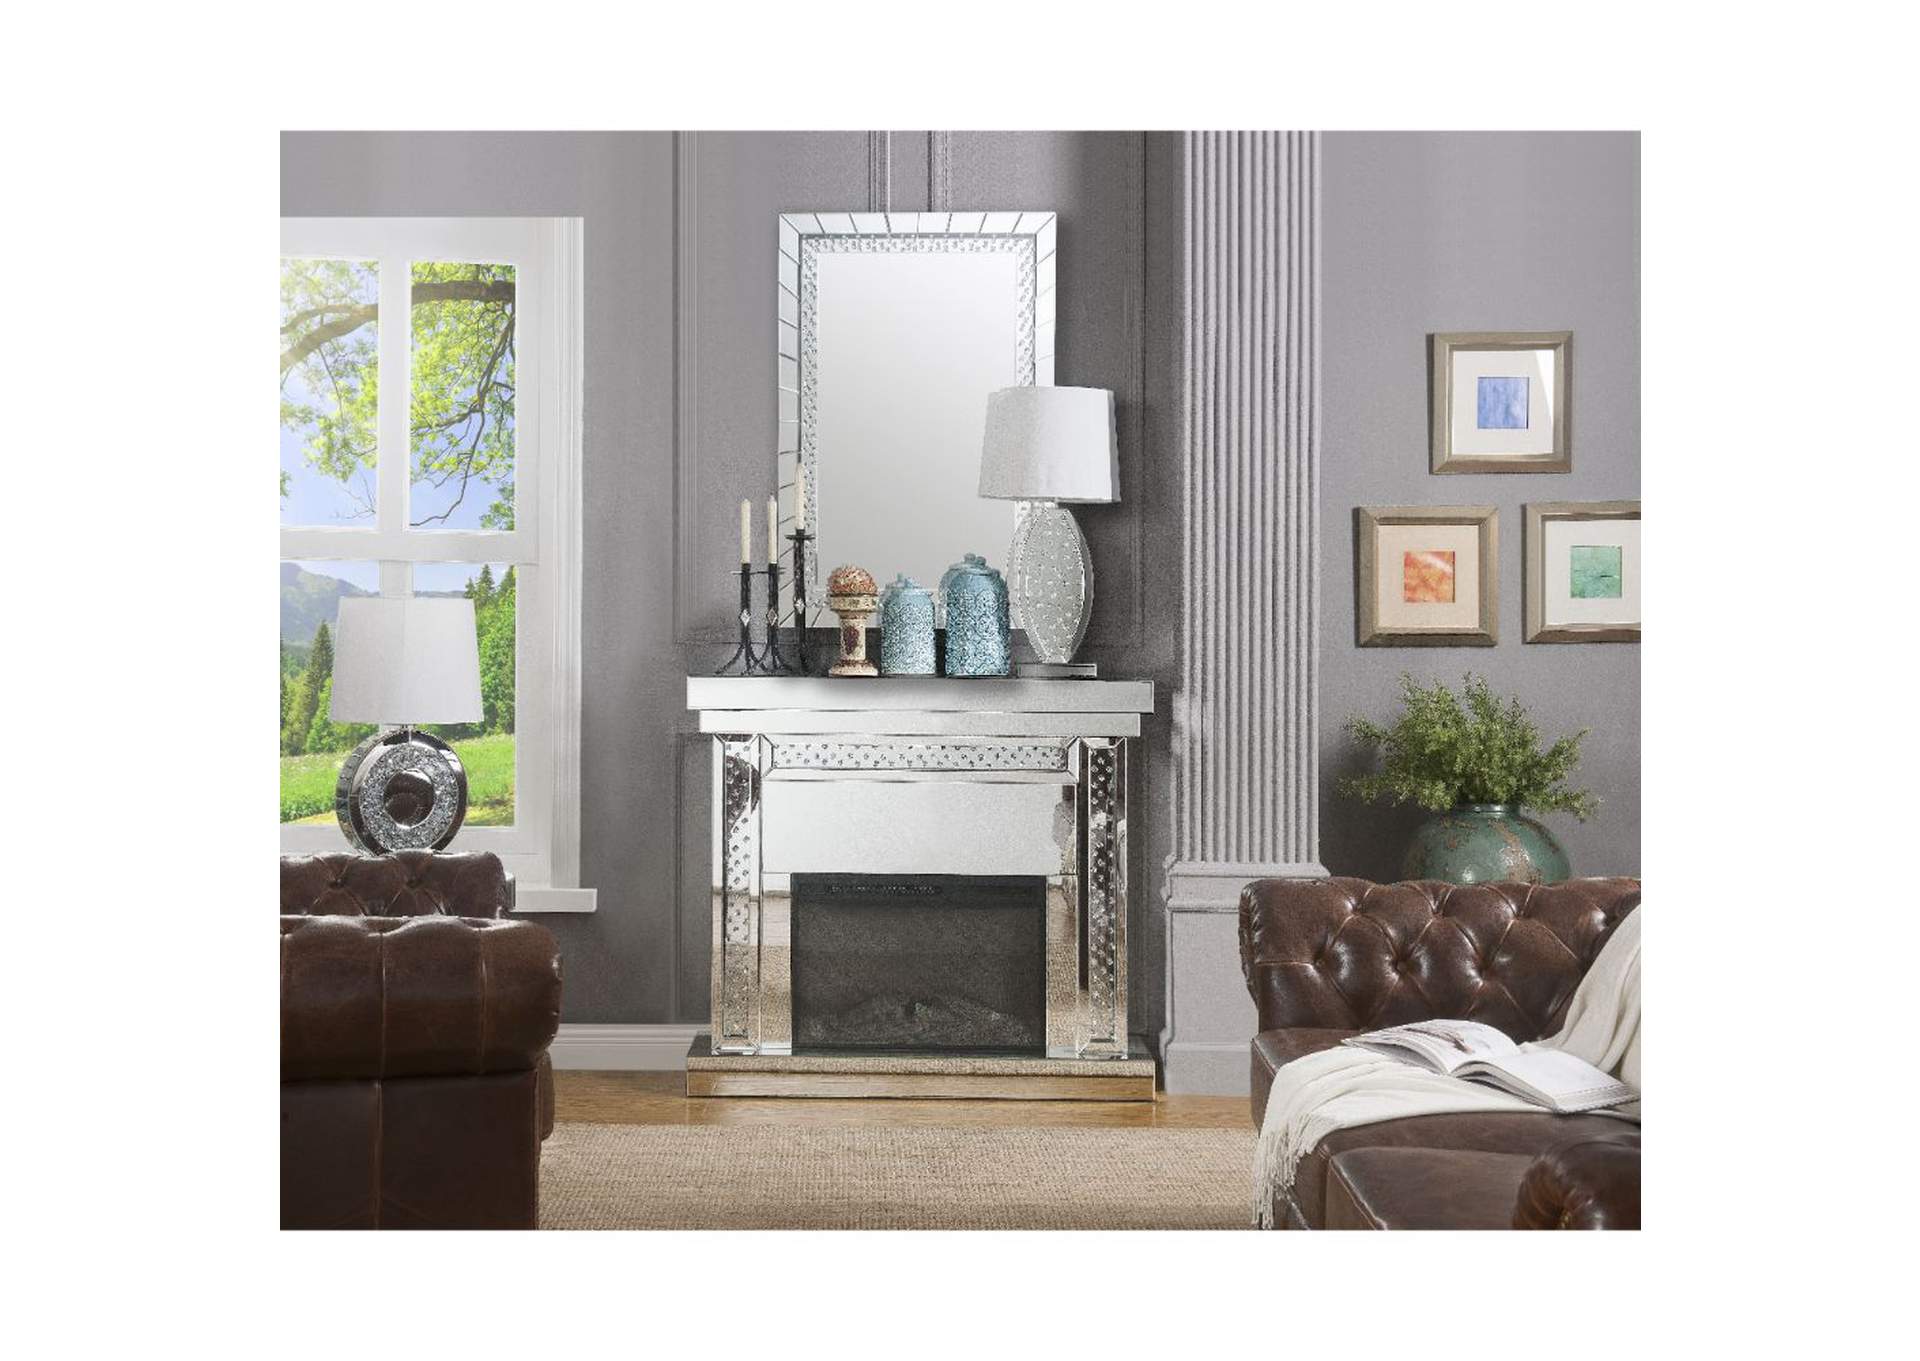 Nysa Mirrored & Faux Crystals Fireplace,Acme